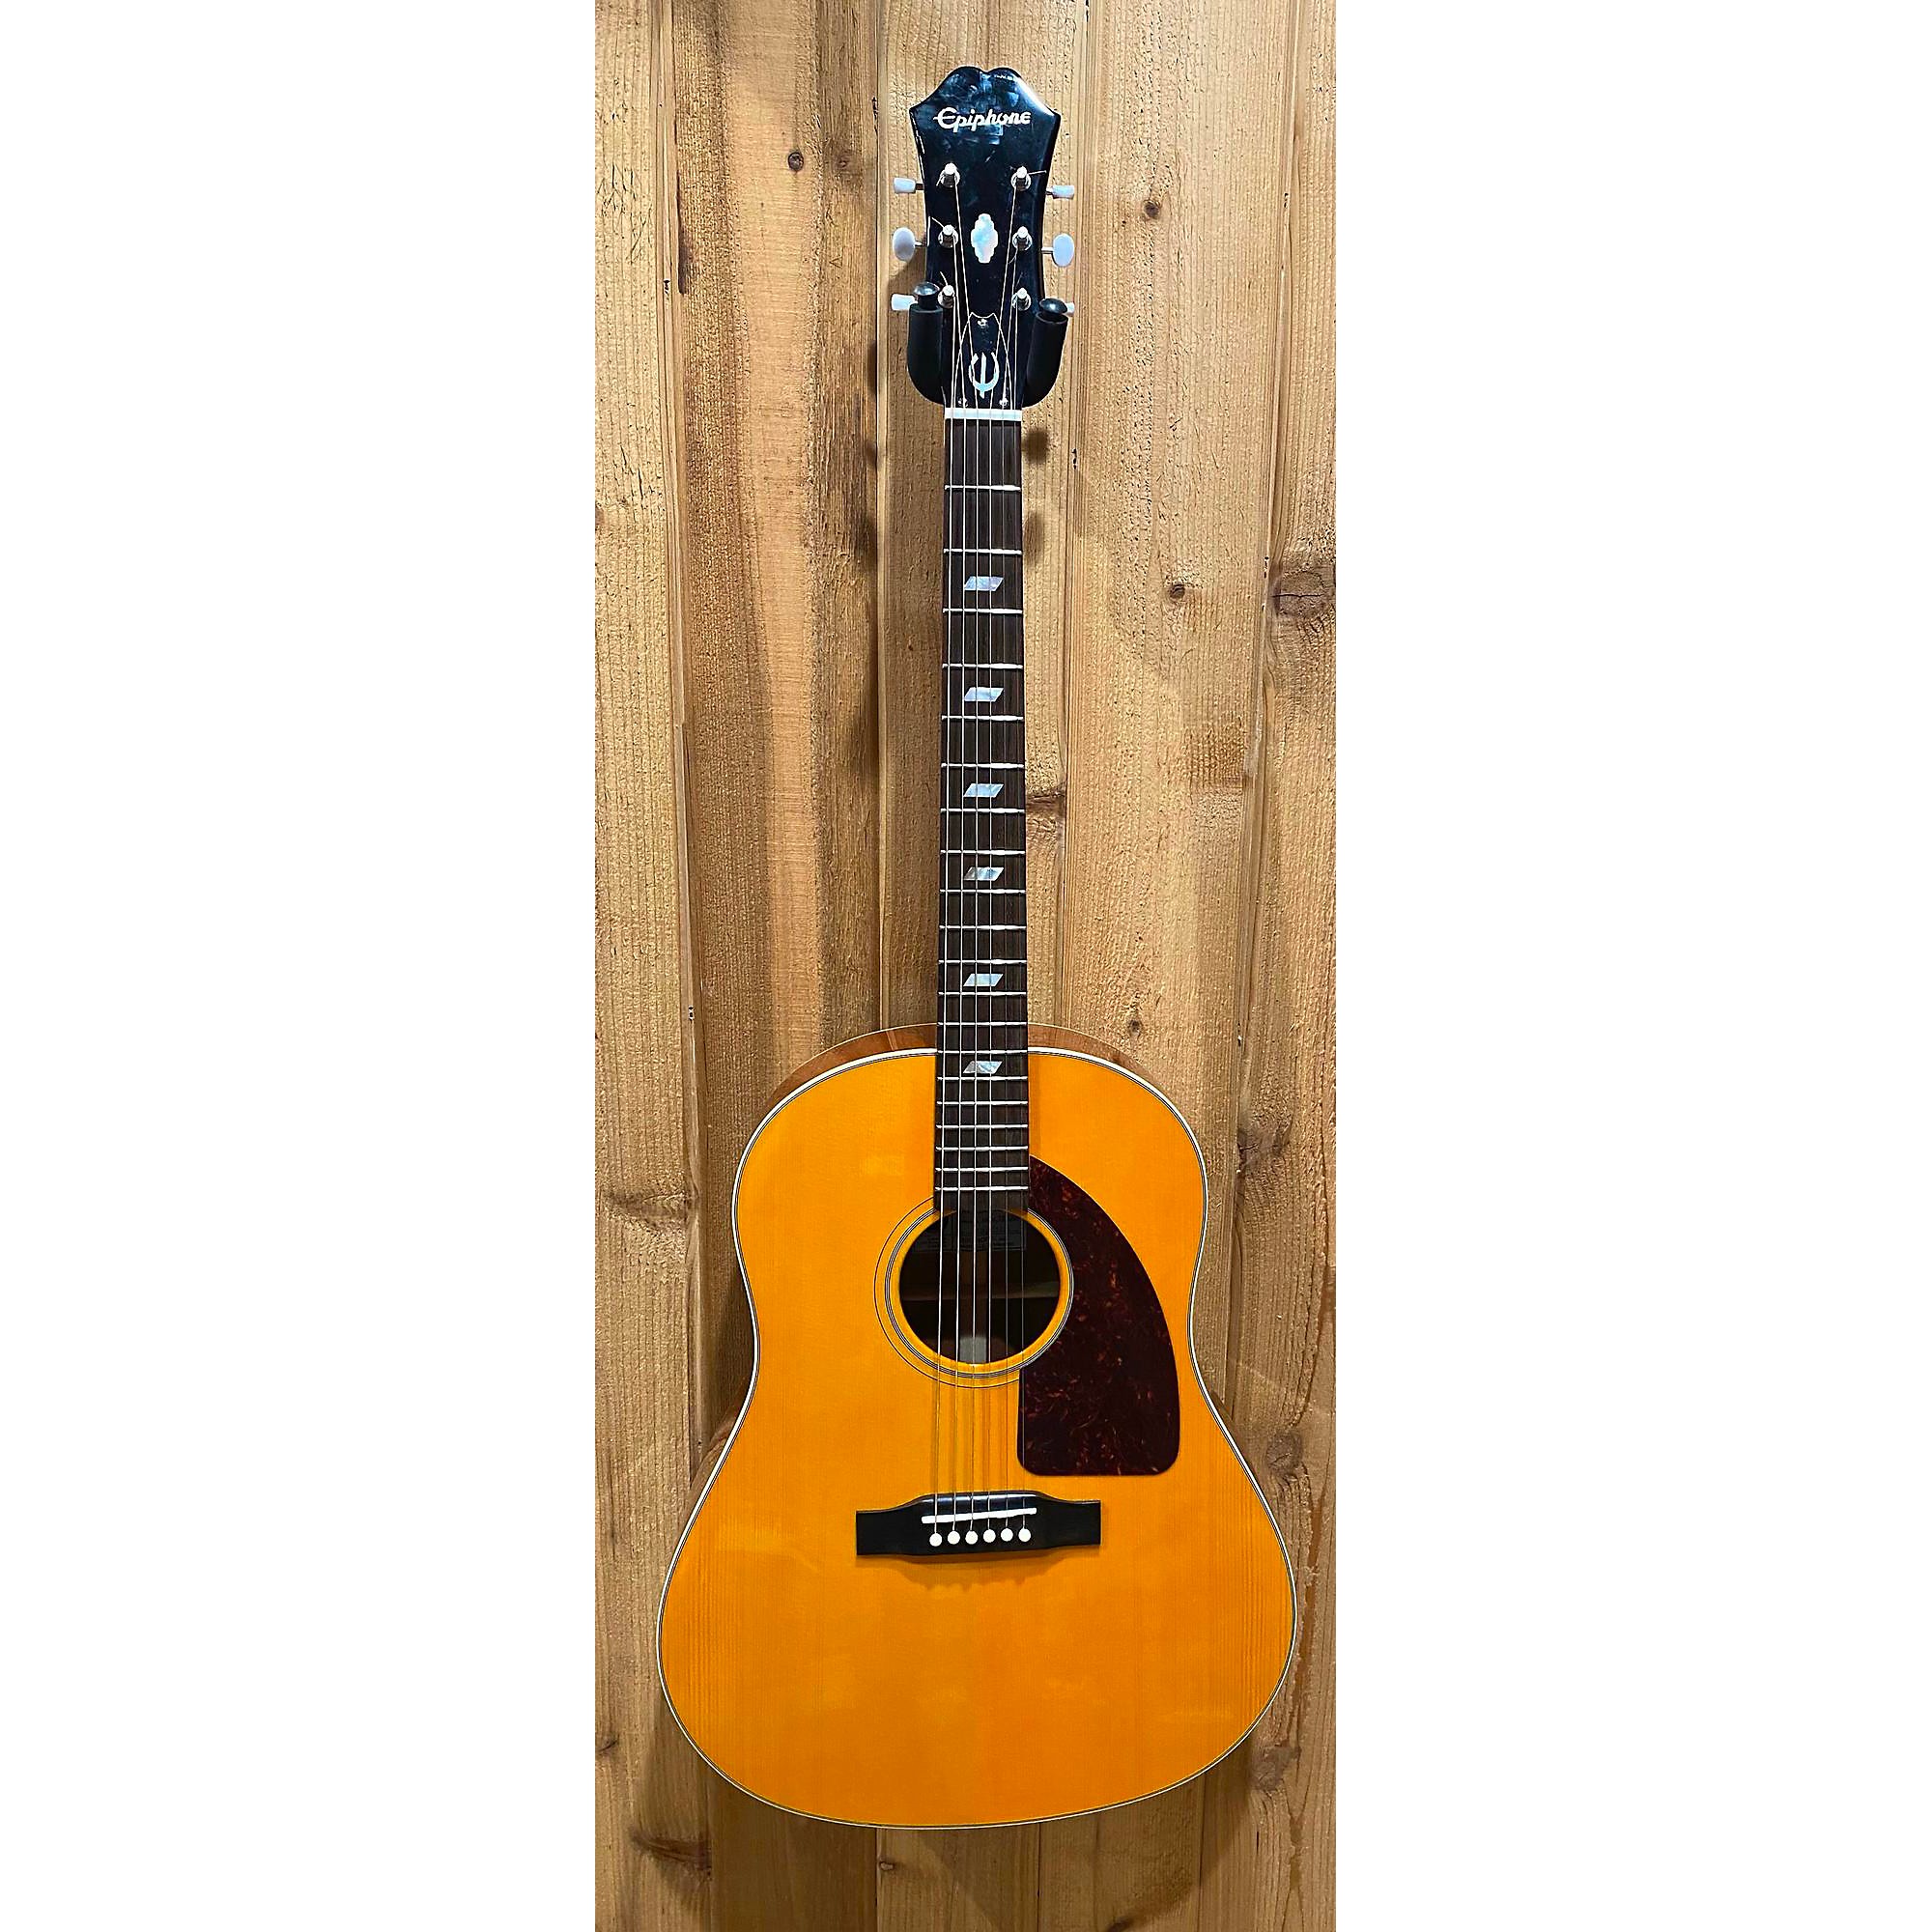 Used Epiphone Inspired By 1964 Texan Acoustic Electric Guitar